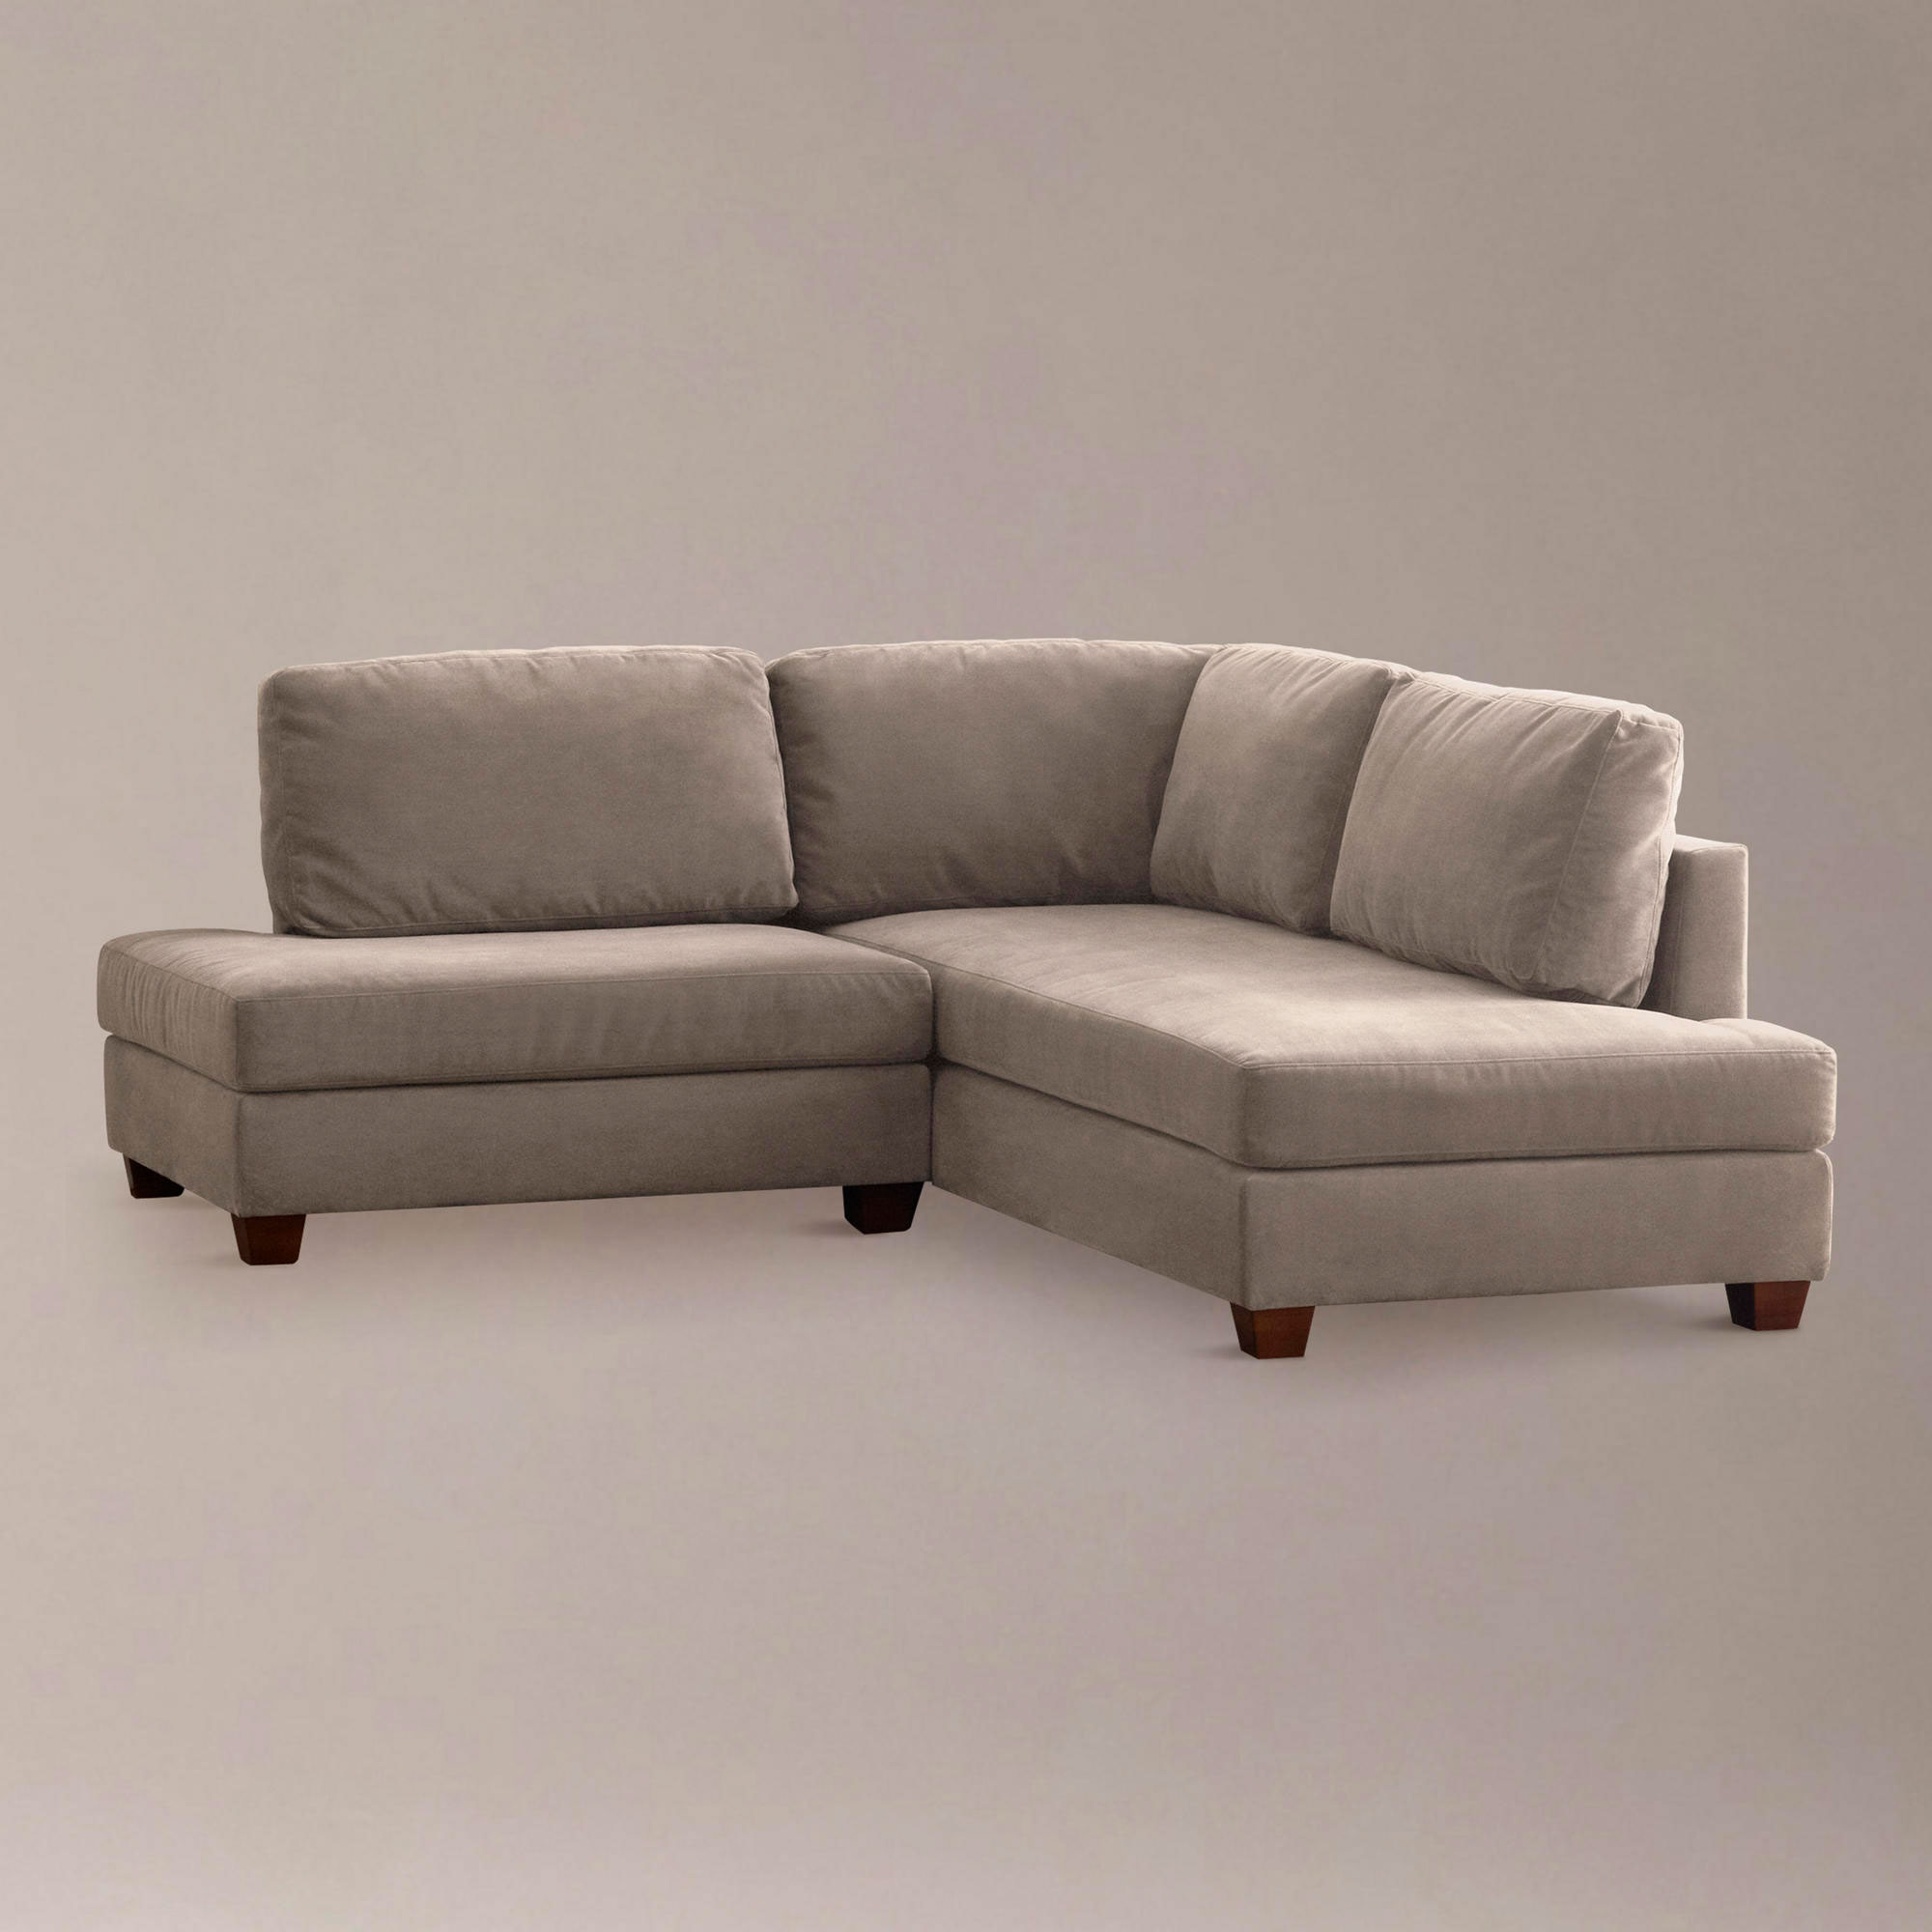 Idea In For Creative Idea In Small Design For Rolf Benz Sofa In Beige Color Style Finished In Modern Rustic Touch Made From Fabric Material Furniture  Rolf Benz Sofa Firms Innovation 